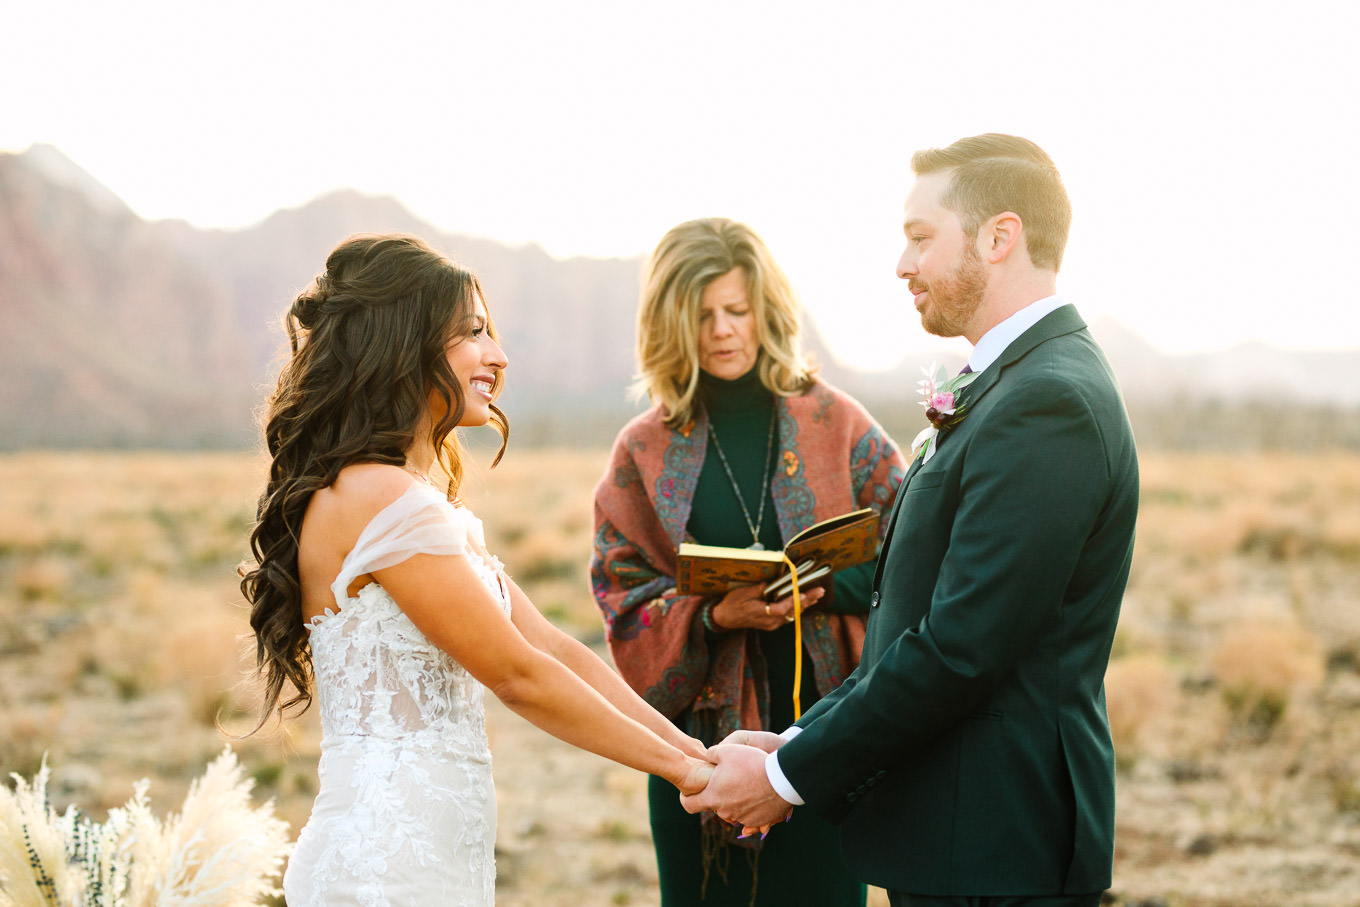 Private wedding ceremony | Zion Under Canvas camping elopement at sunrise | Colorful elopement photography | #utahelopement #zionelopement #zionwedding #undercanvaszion #sunriseelopement #adventureelopement  Source: Mary Costa Photography | Los Angeles